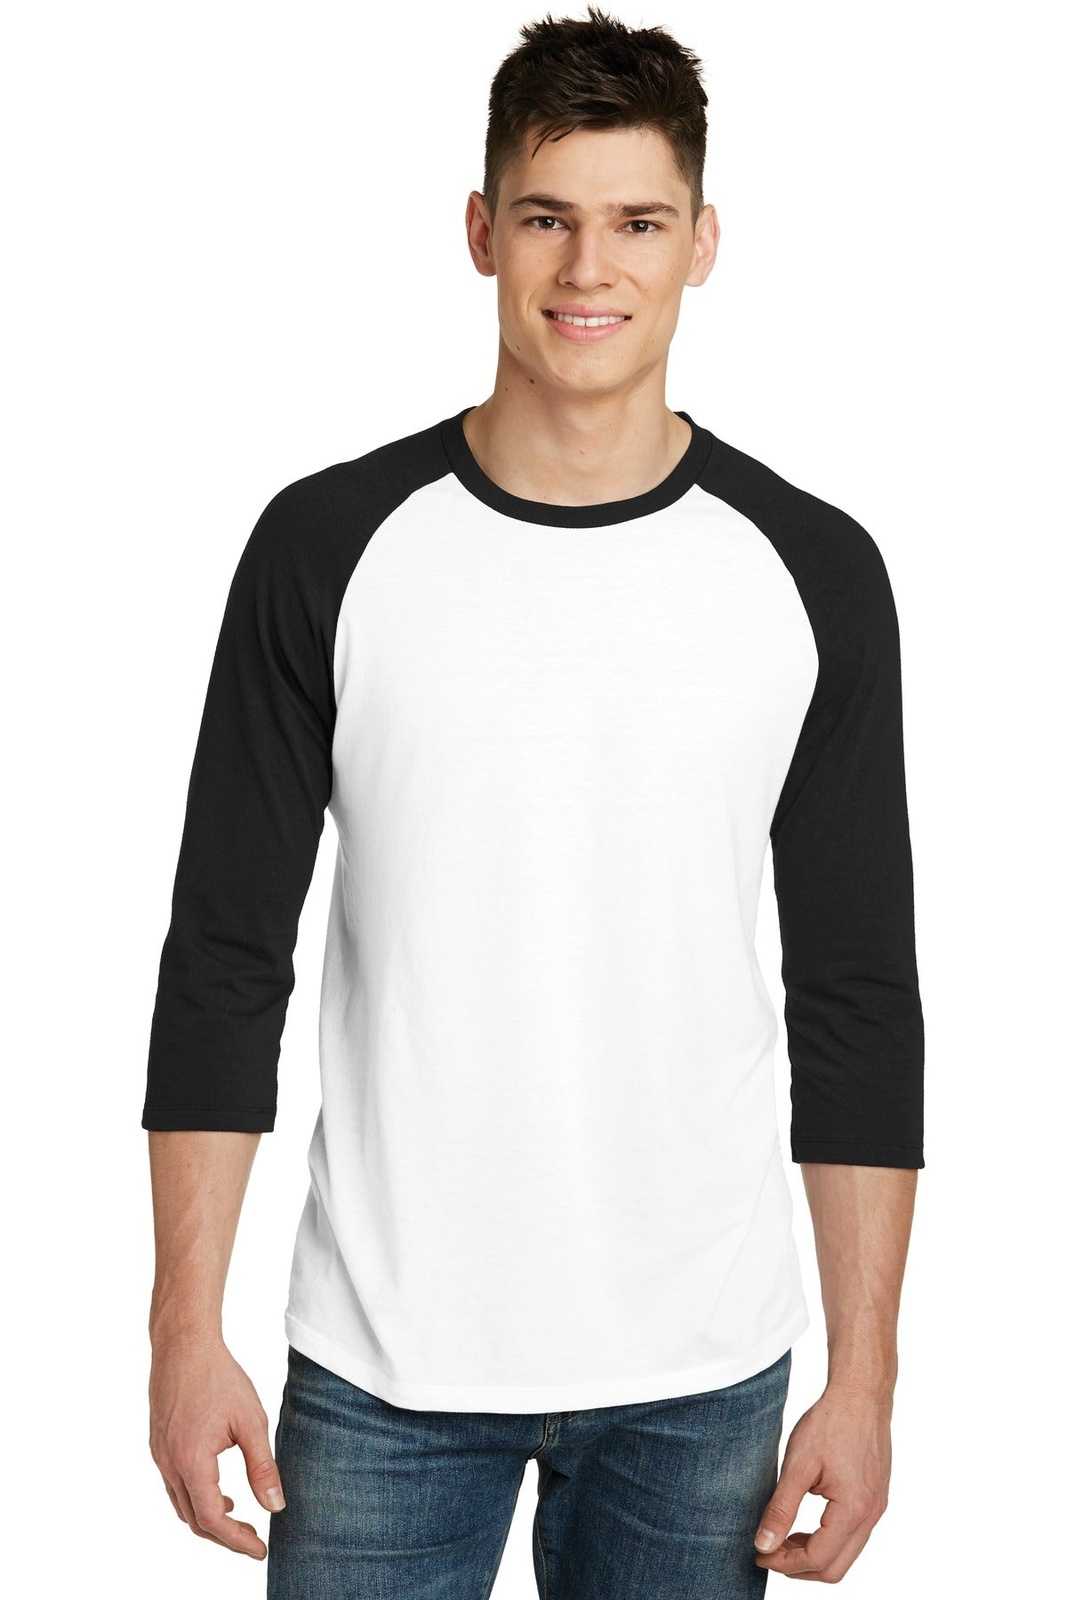 District DT6210 Very Important Tee 3/4-Sleeve Raglan - Black White - HIT a Double - 1